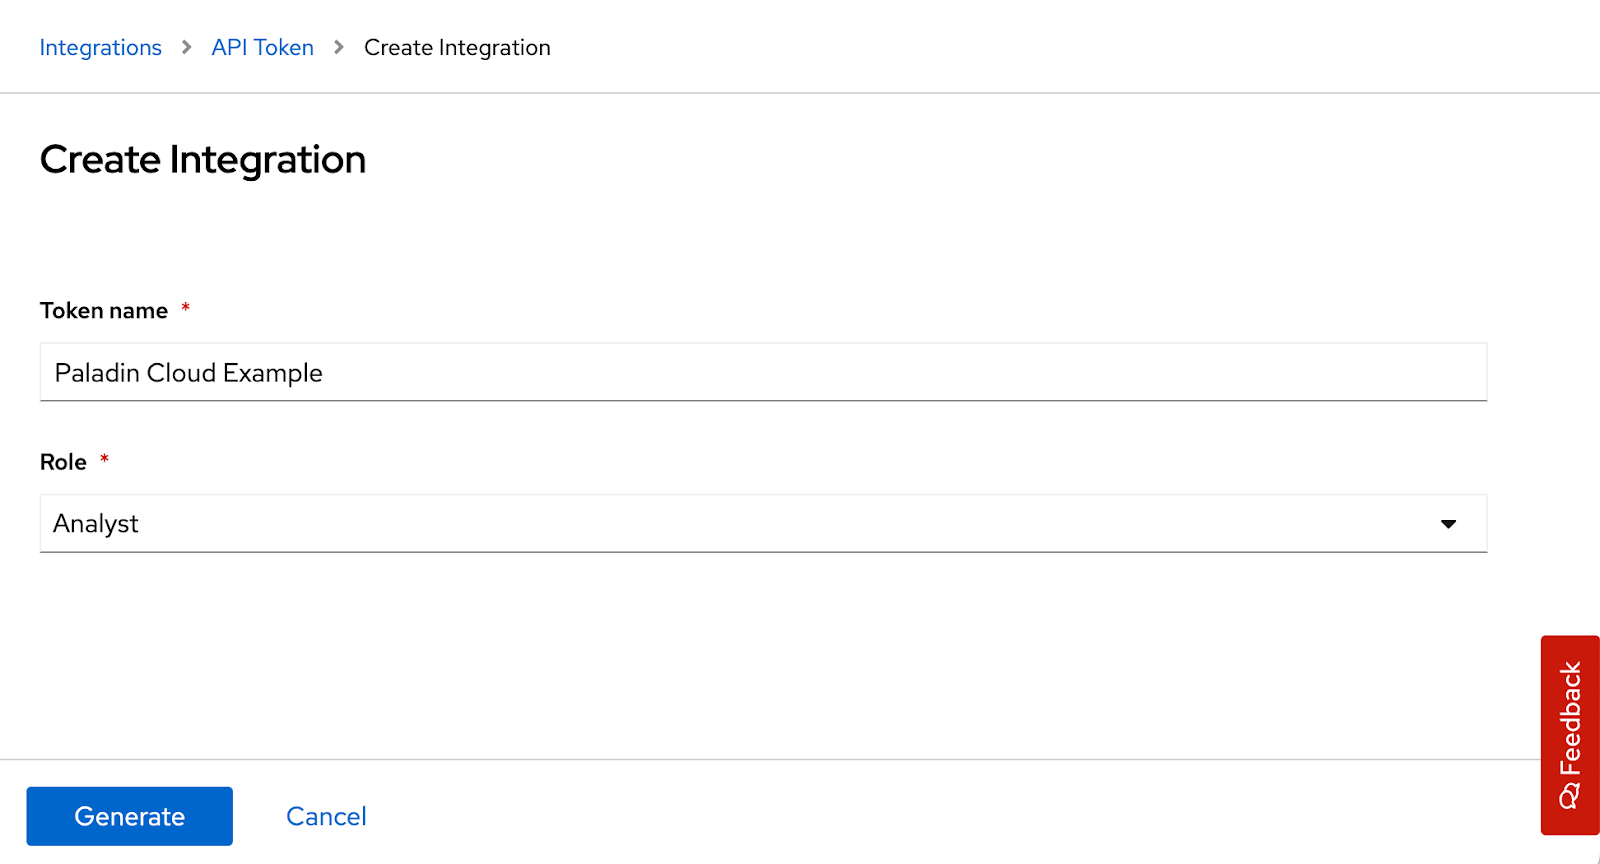 A screenshot of the Create Integration menu. Showing the fields fro Token Name and Role. The role is set to Analyst.